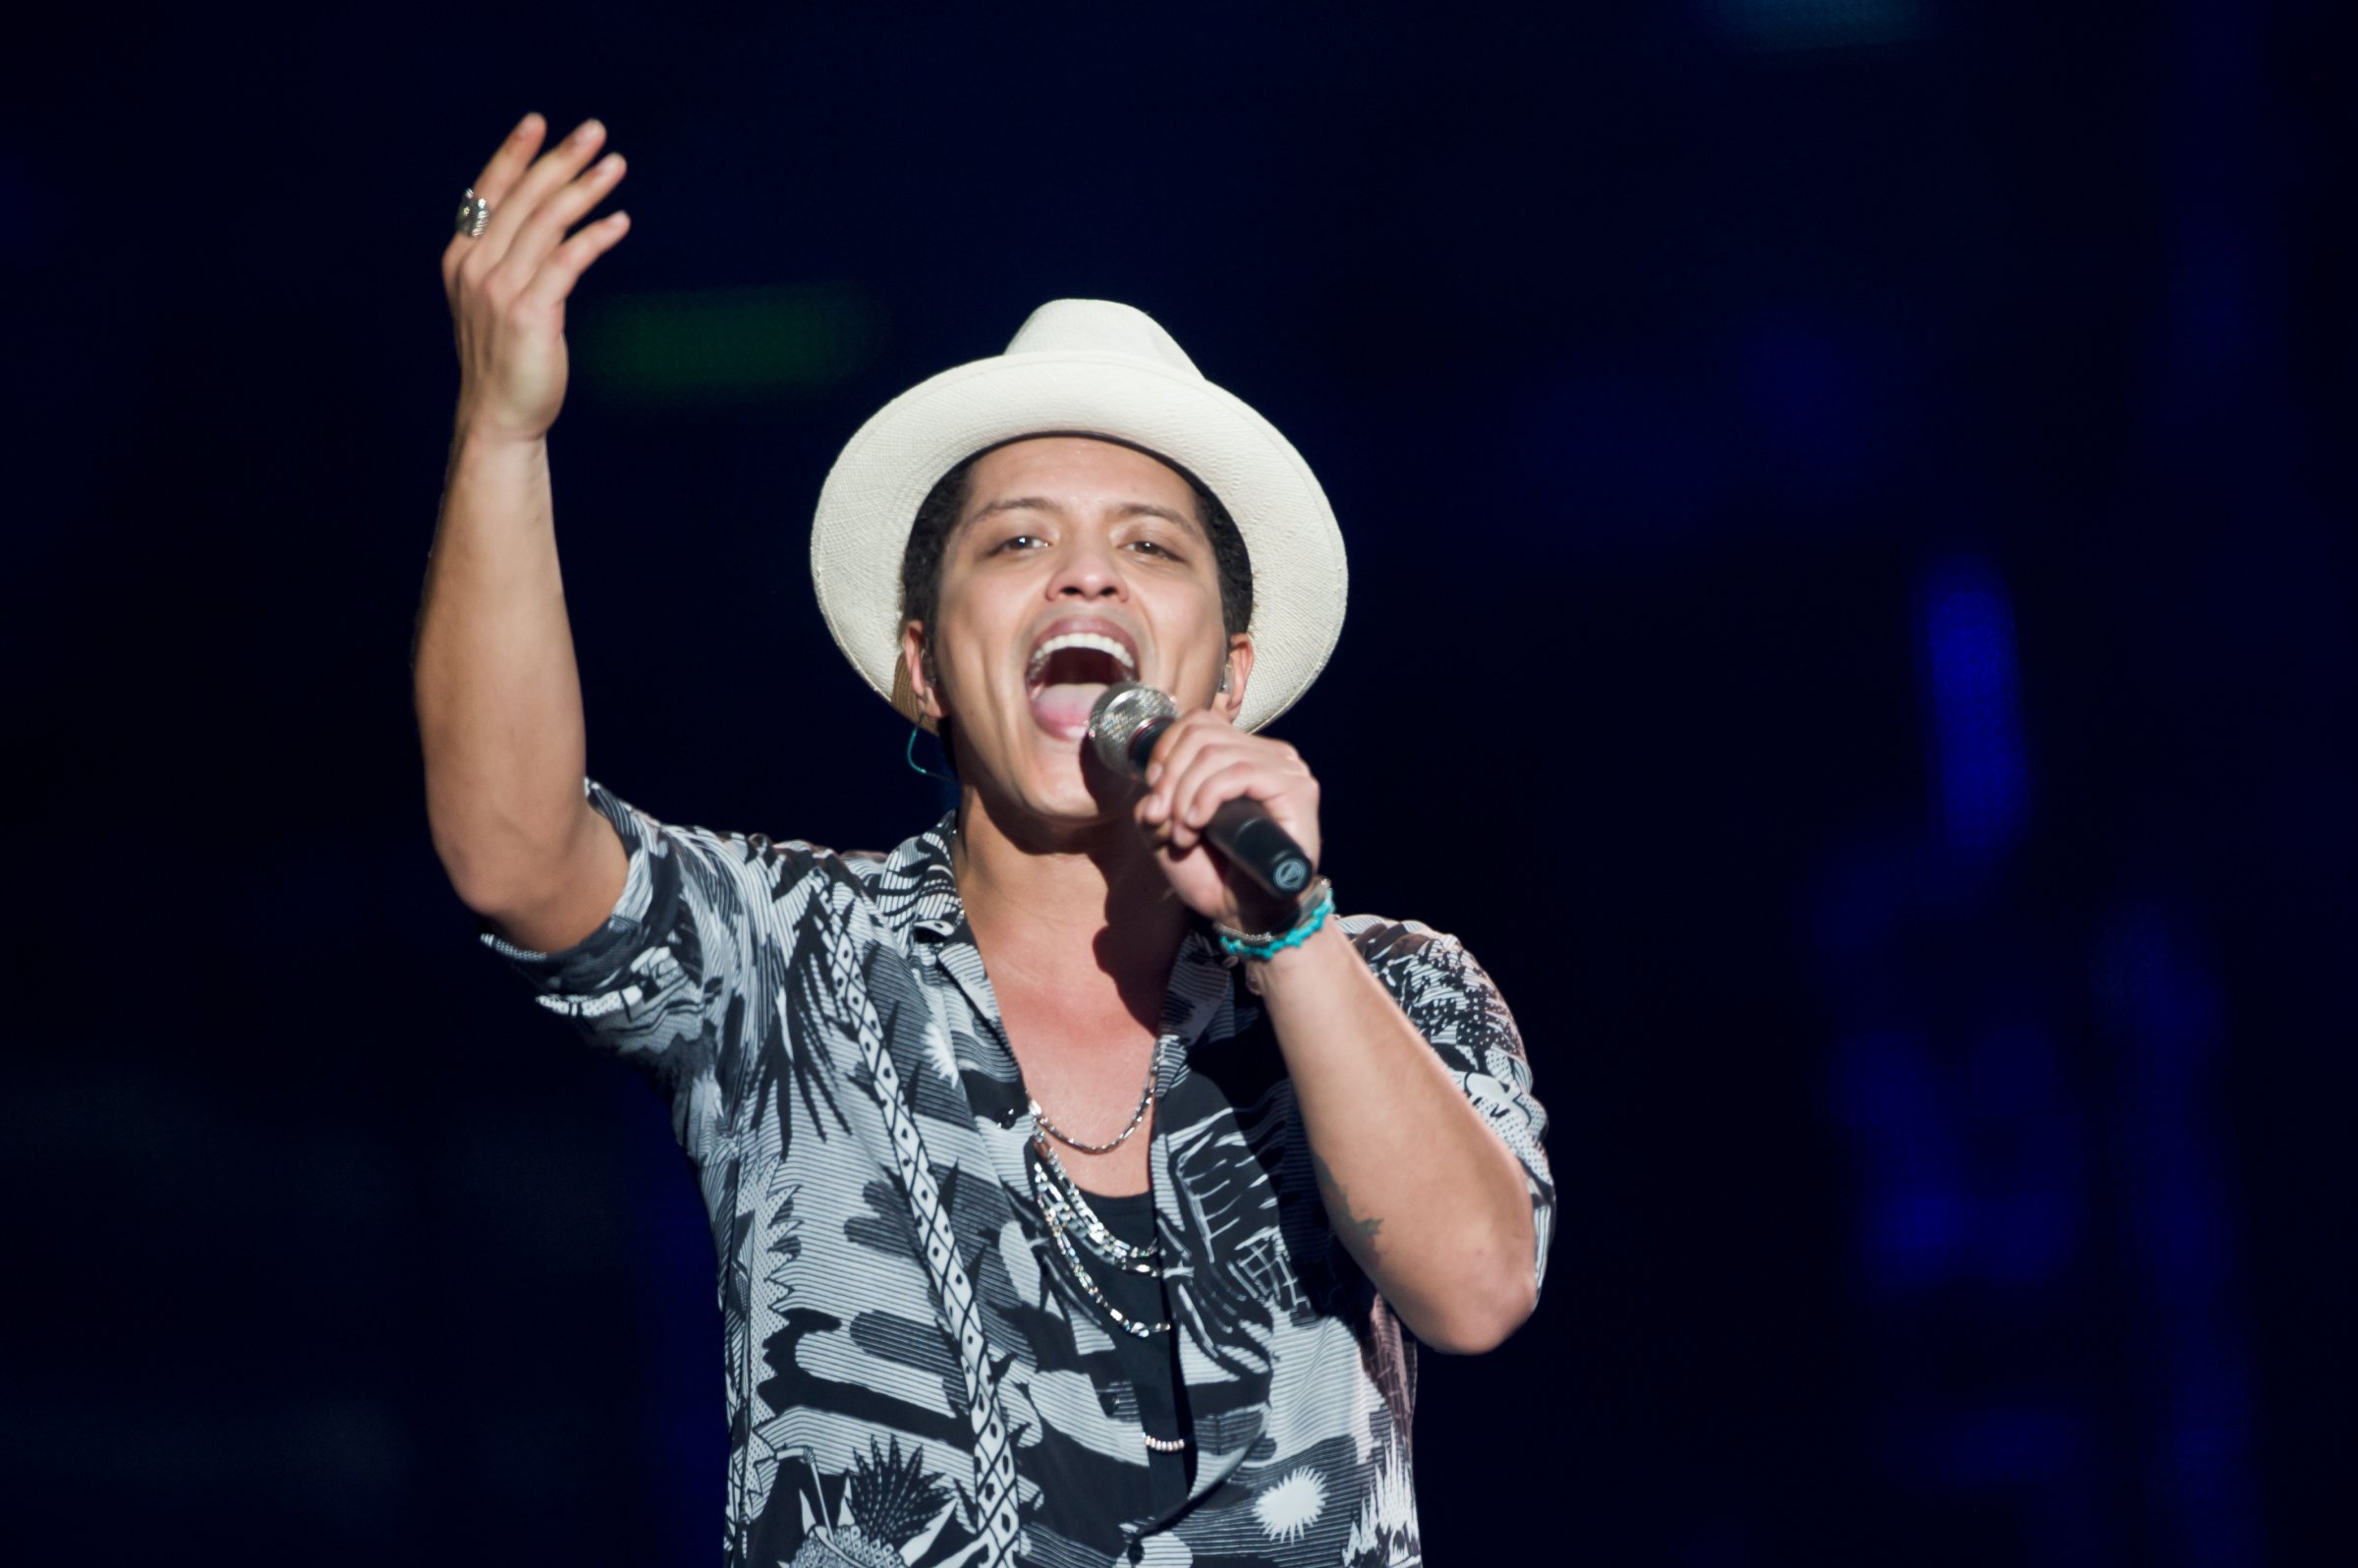 Bruno Mars performs on stage at Wireless Festival at Finsbury Park on July 6, 2014 in London, United Kingdom.